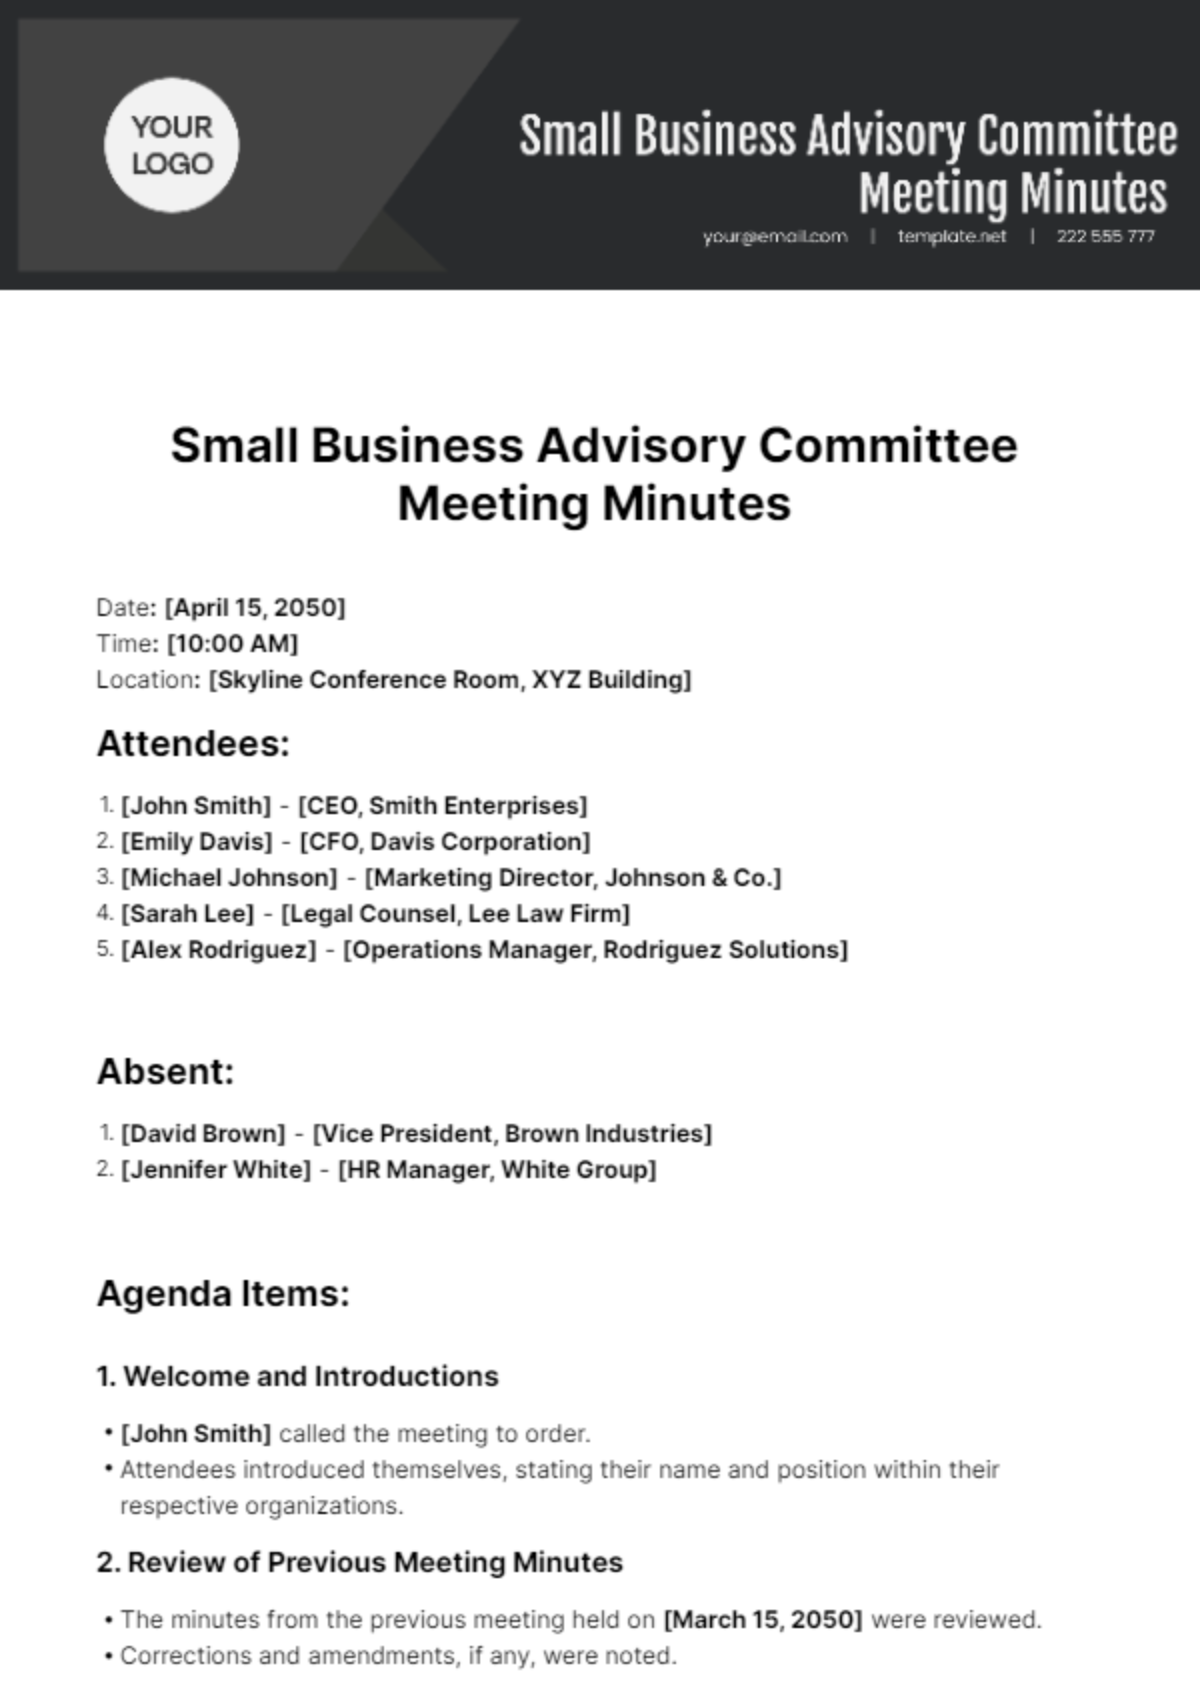 Small Business Advisory Committee Meeting Minutes Template